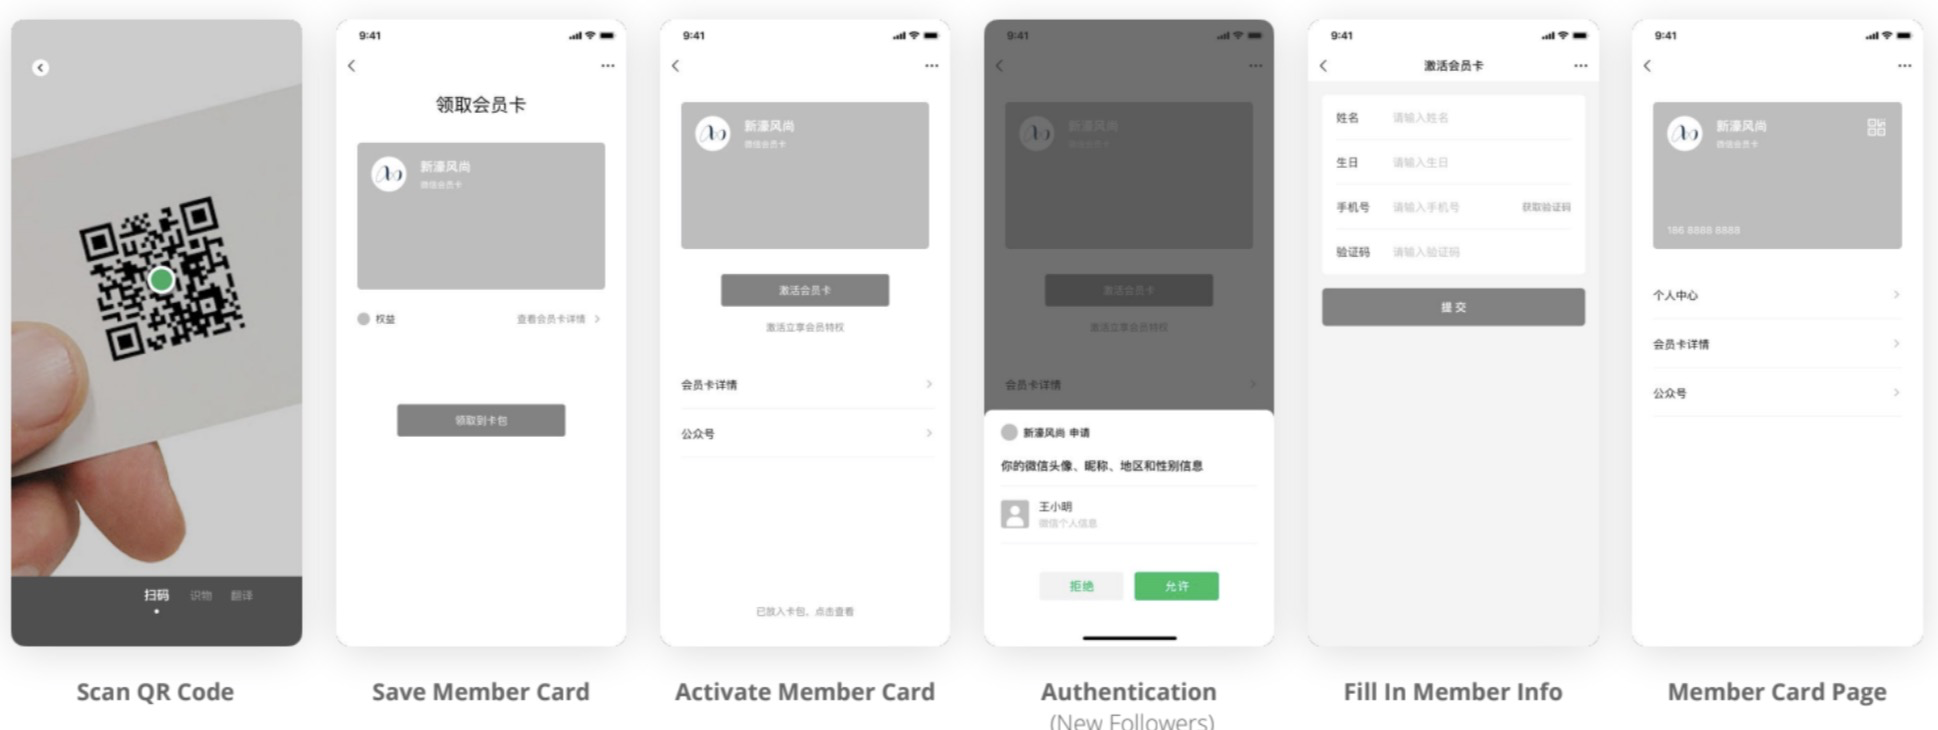 Image of the membership card registration process on WeChat